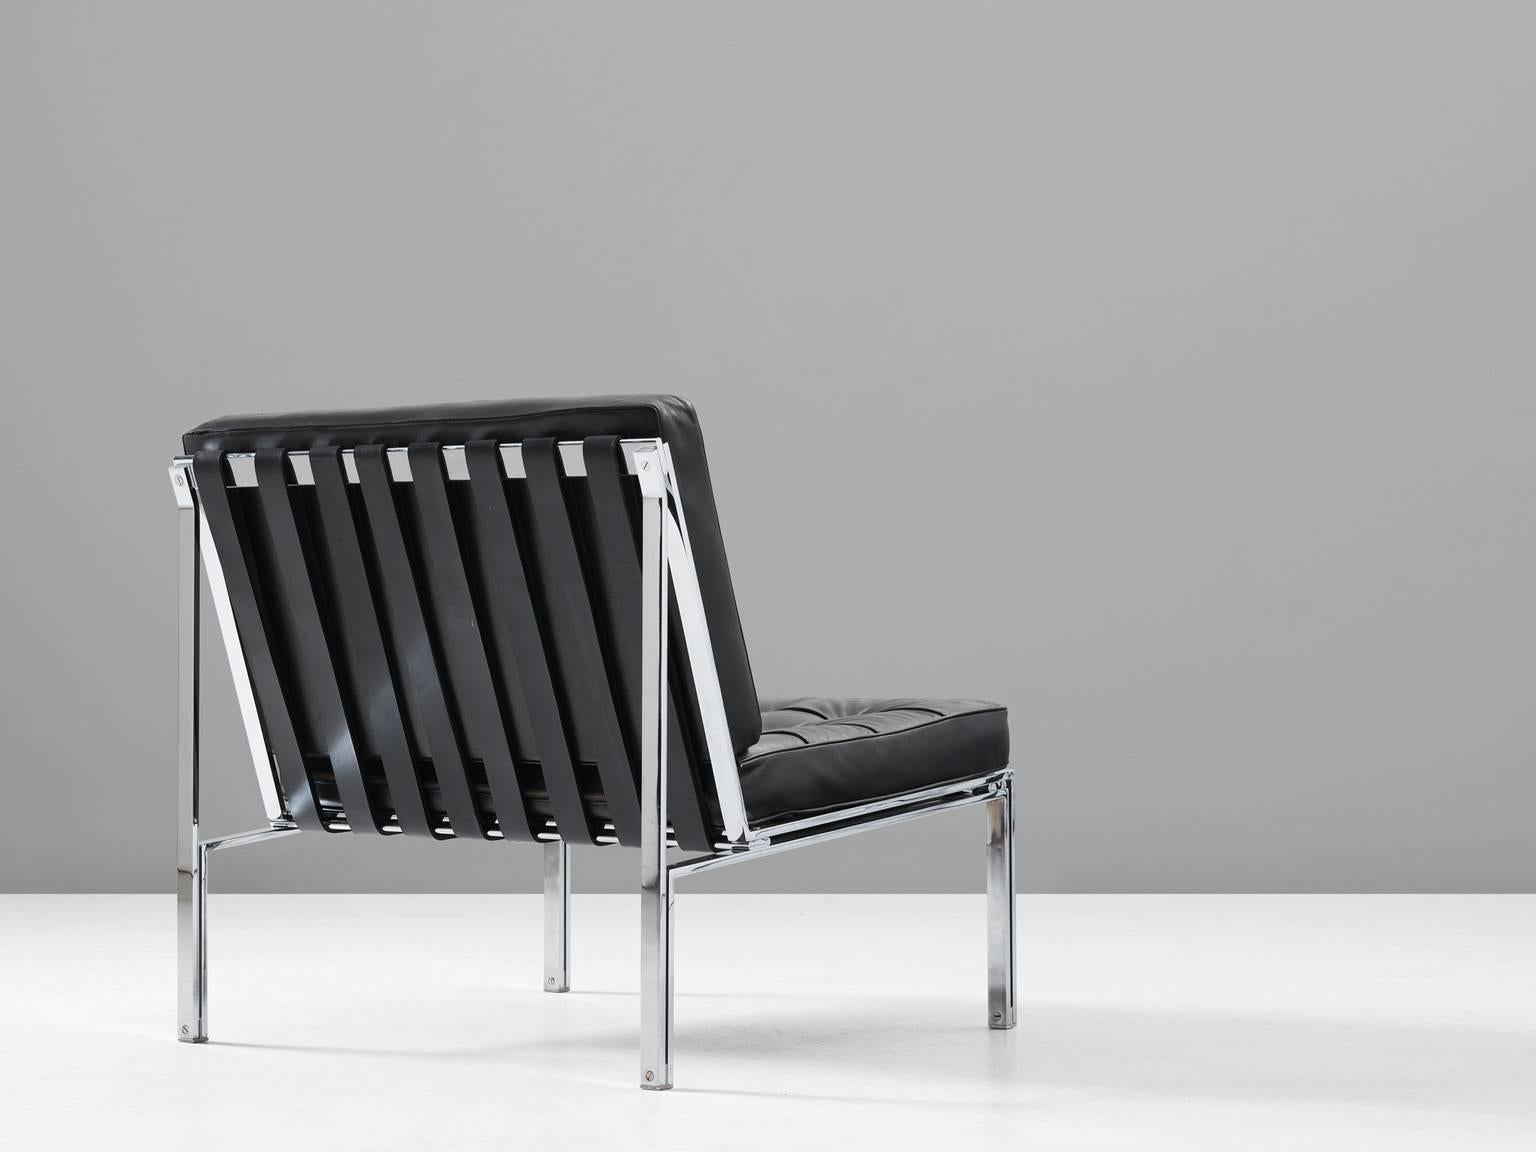 Lounge chair KT-221, in chromed metal and black leather, by Kurth Thutt for Desede, Switzerland, 1956.

Modern and sleek chair by Swiss designer Kurth Thut. This architectural piece consist of a chromed steel frame with leather straps as seating